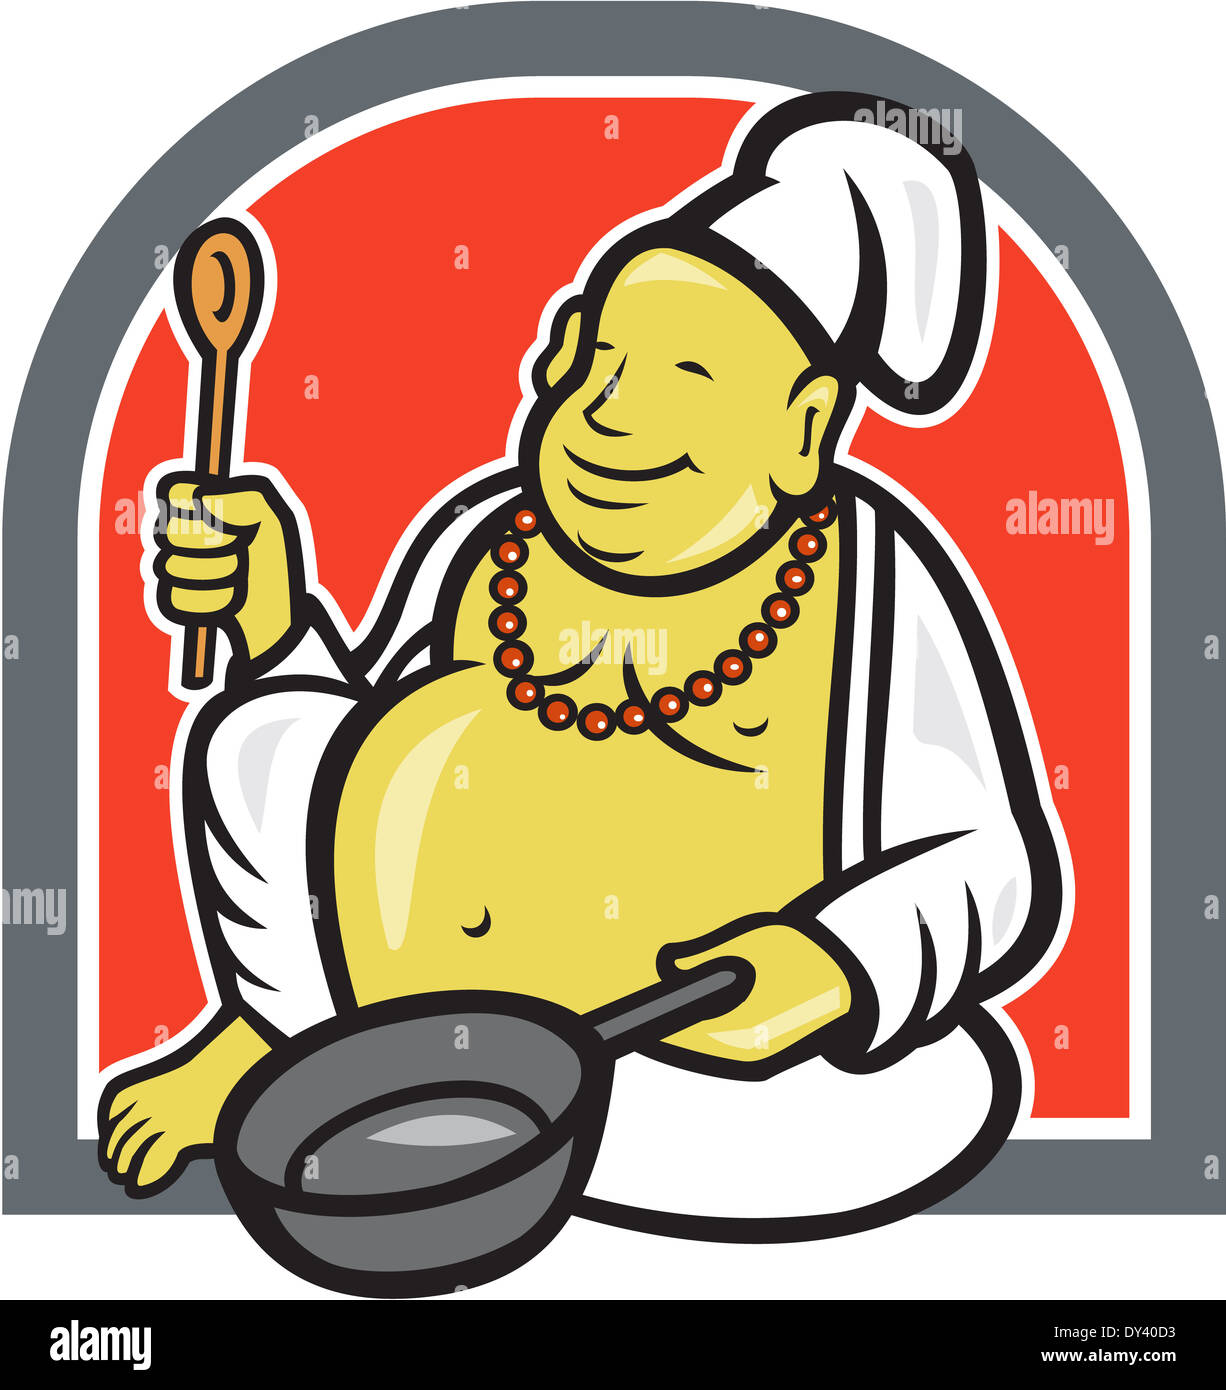 Illustration of a happy fat Buddha chef cook holding spatula and frying pan sitting down done in cartoon style Stock Photo